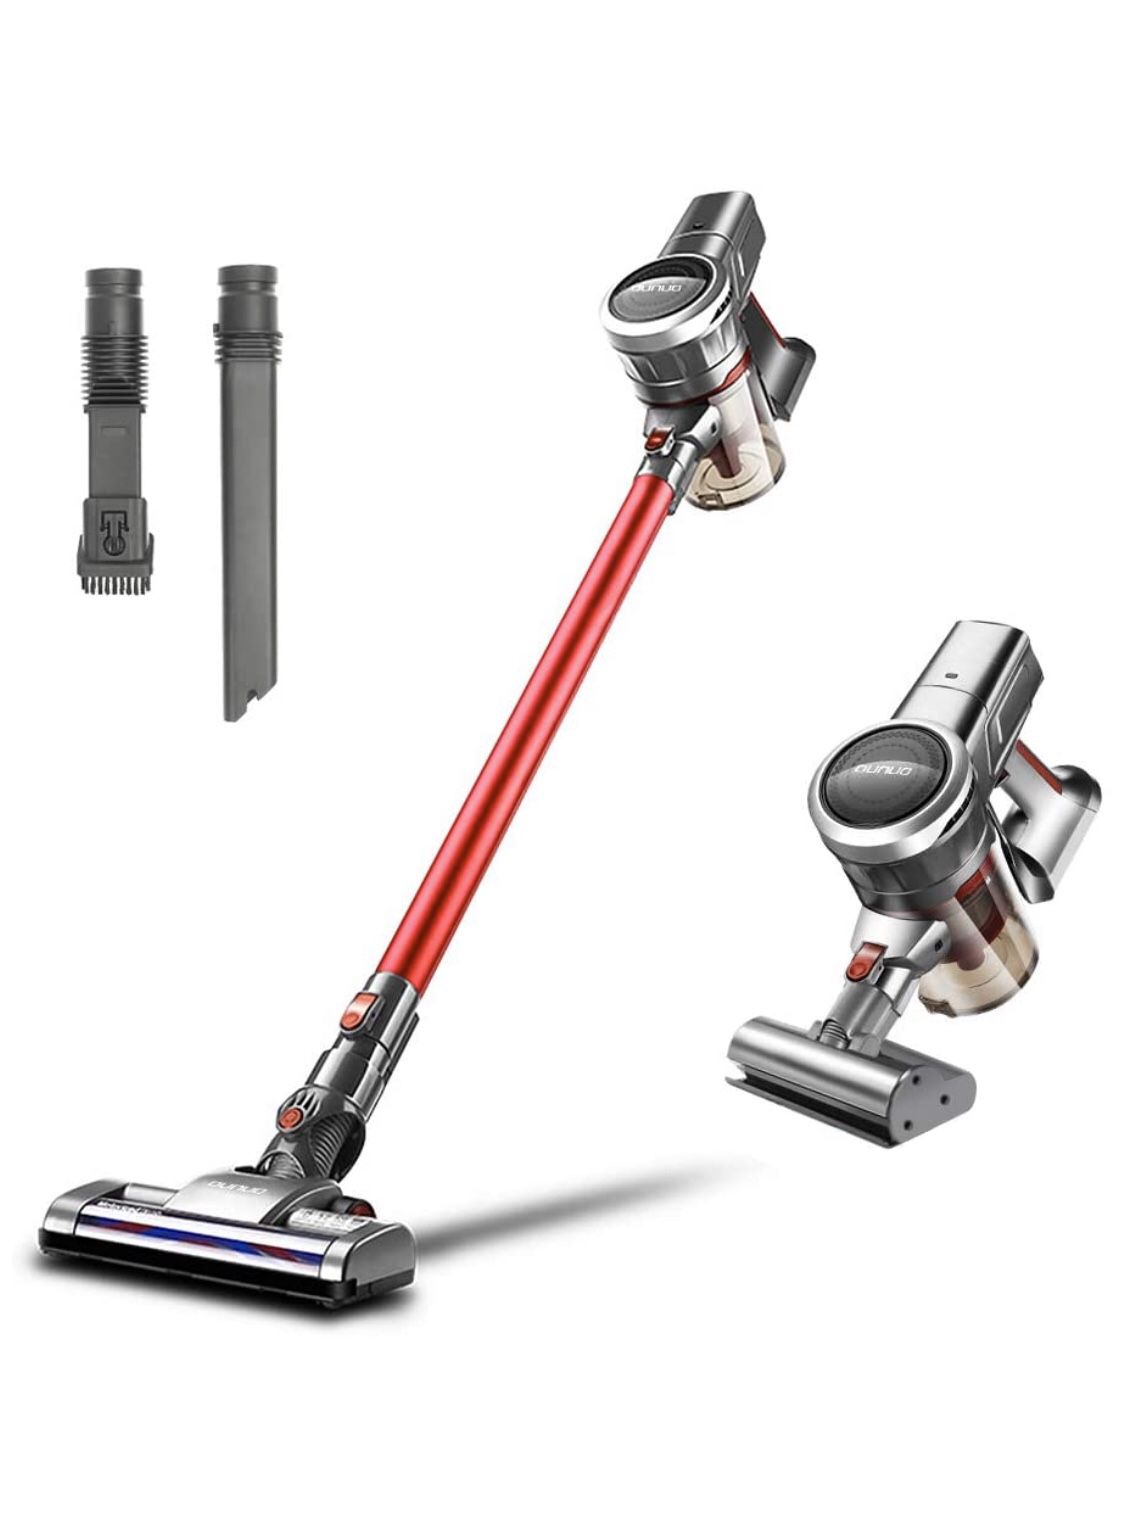 OUNUO Cordless Stick Vacuum Cleaner with Extra Brush, Portable Lightweight 3 in 1 Cordless Vacuum with 9000Pa Suction for Floor Carpet Laminate Tile